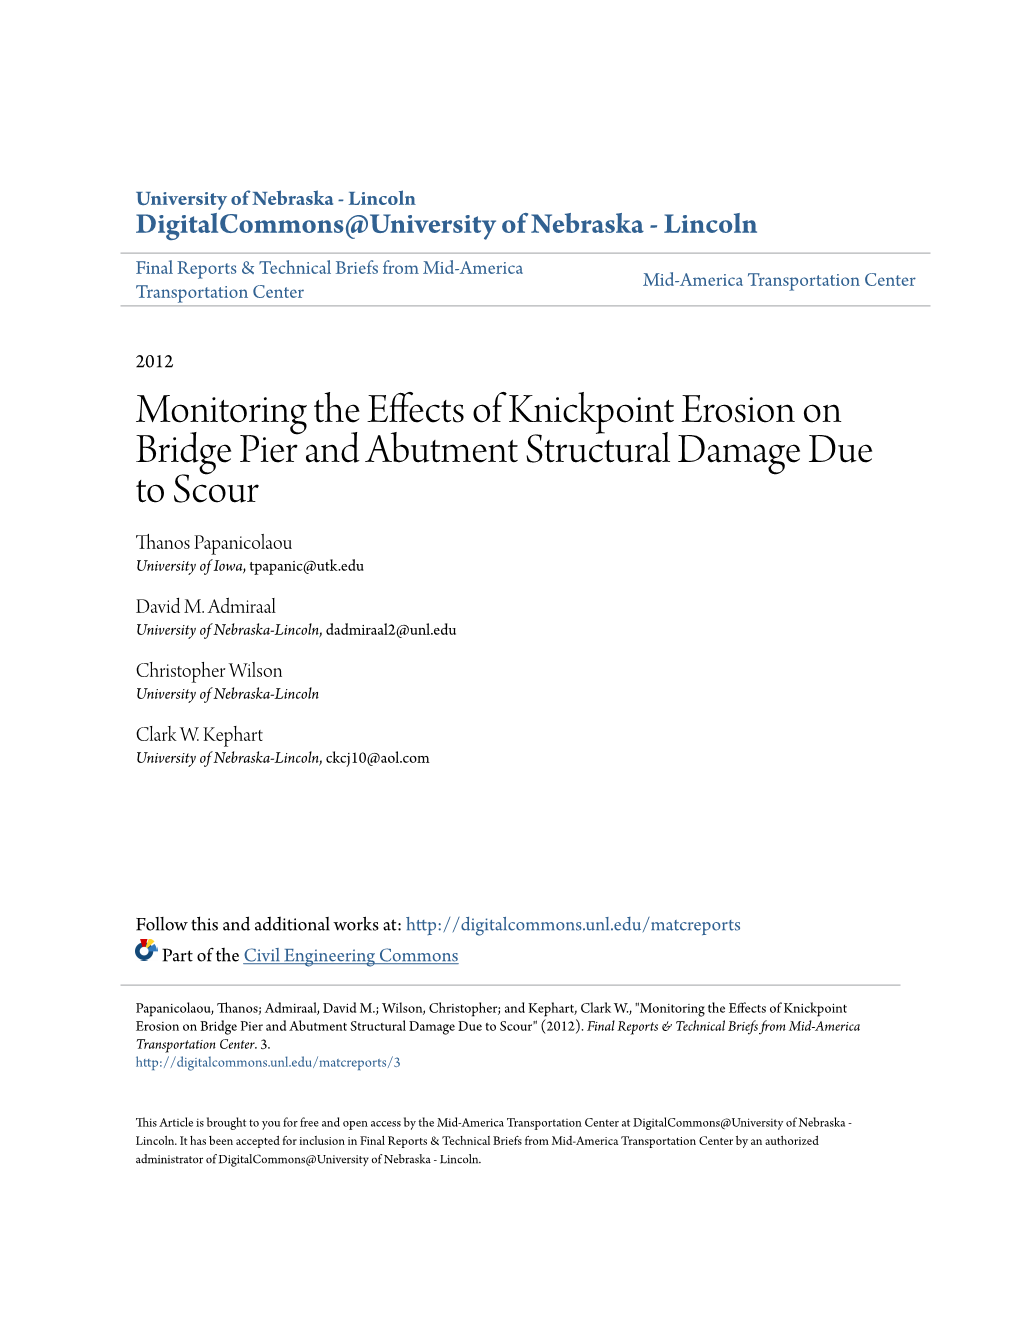 Monitoring the Effects of Knickpoint Erosion on Bridge Pier and Abutment Structural Damage Due to Scour Thanos Papanicolaou University of Iowa, Tpapanic@Utk.Edu